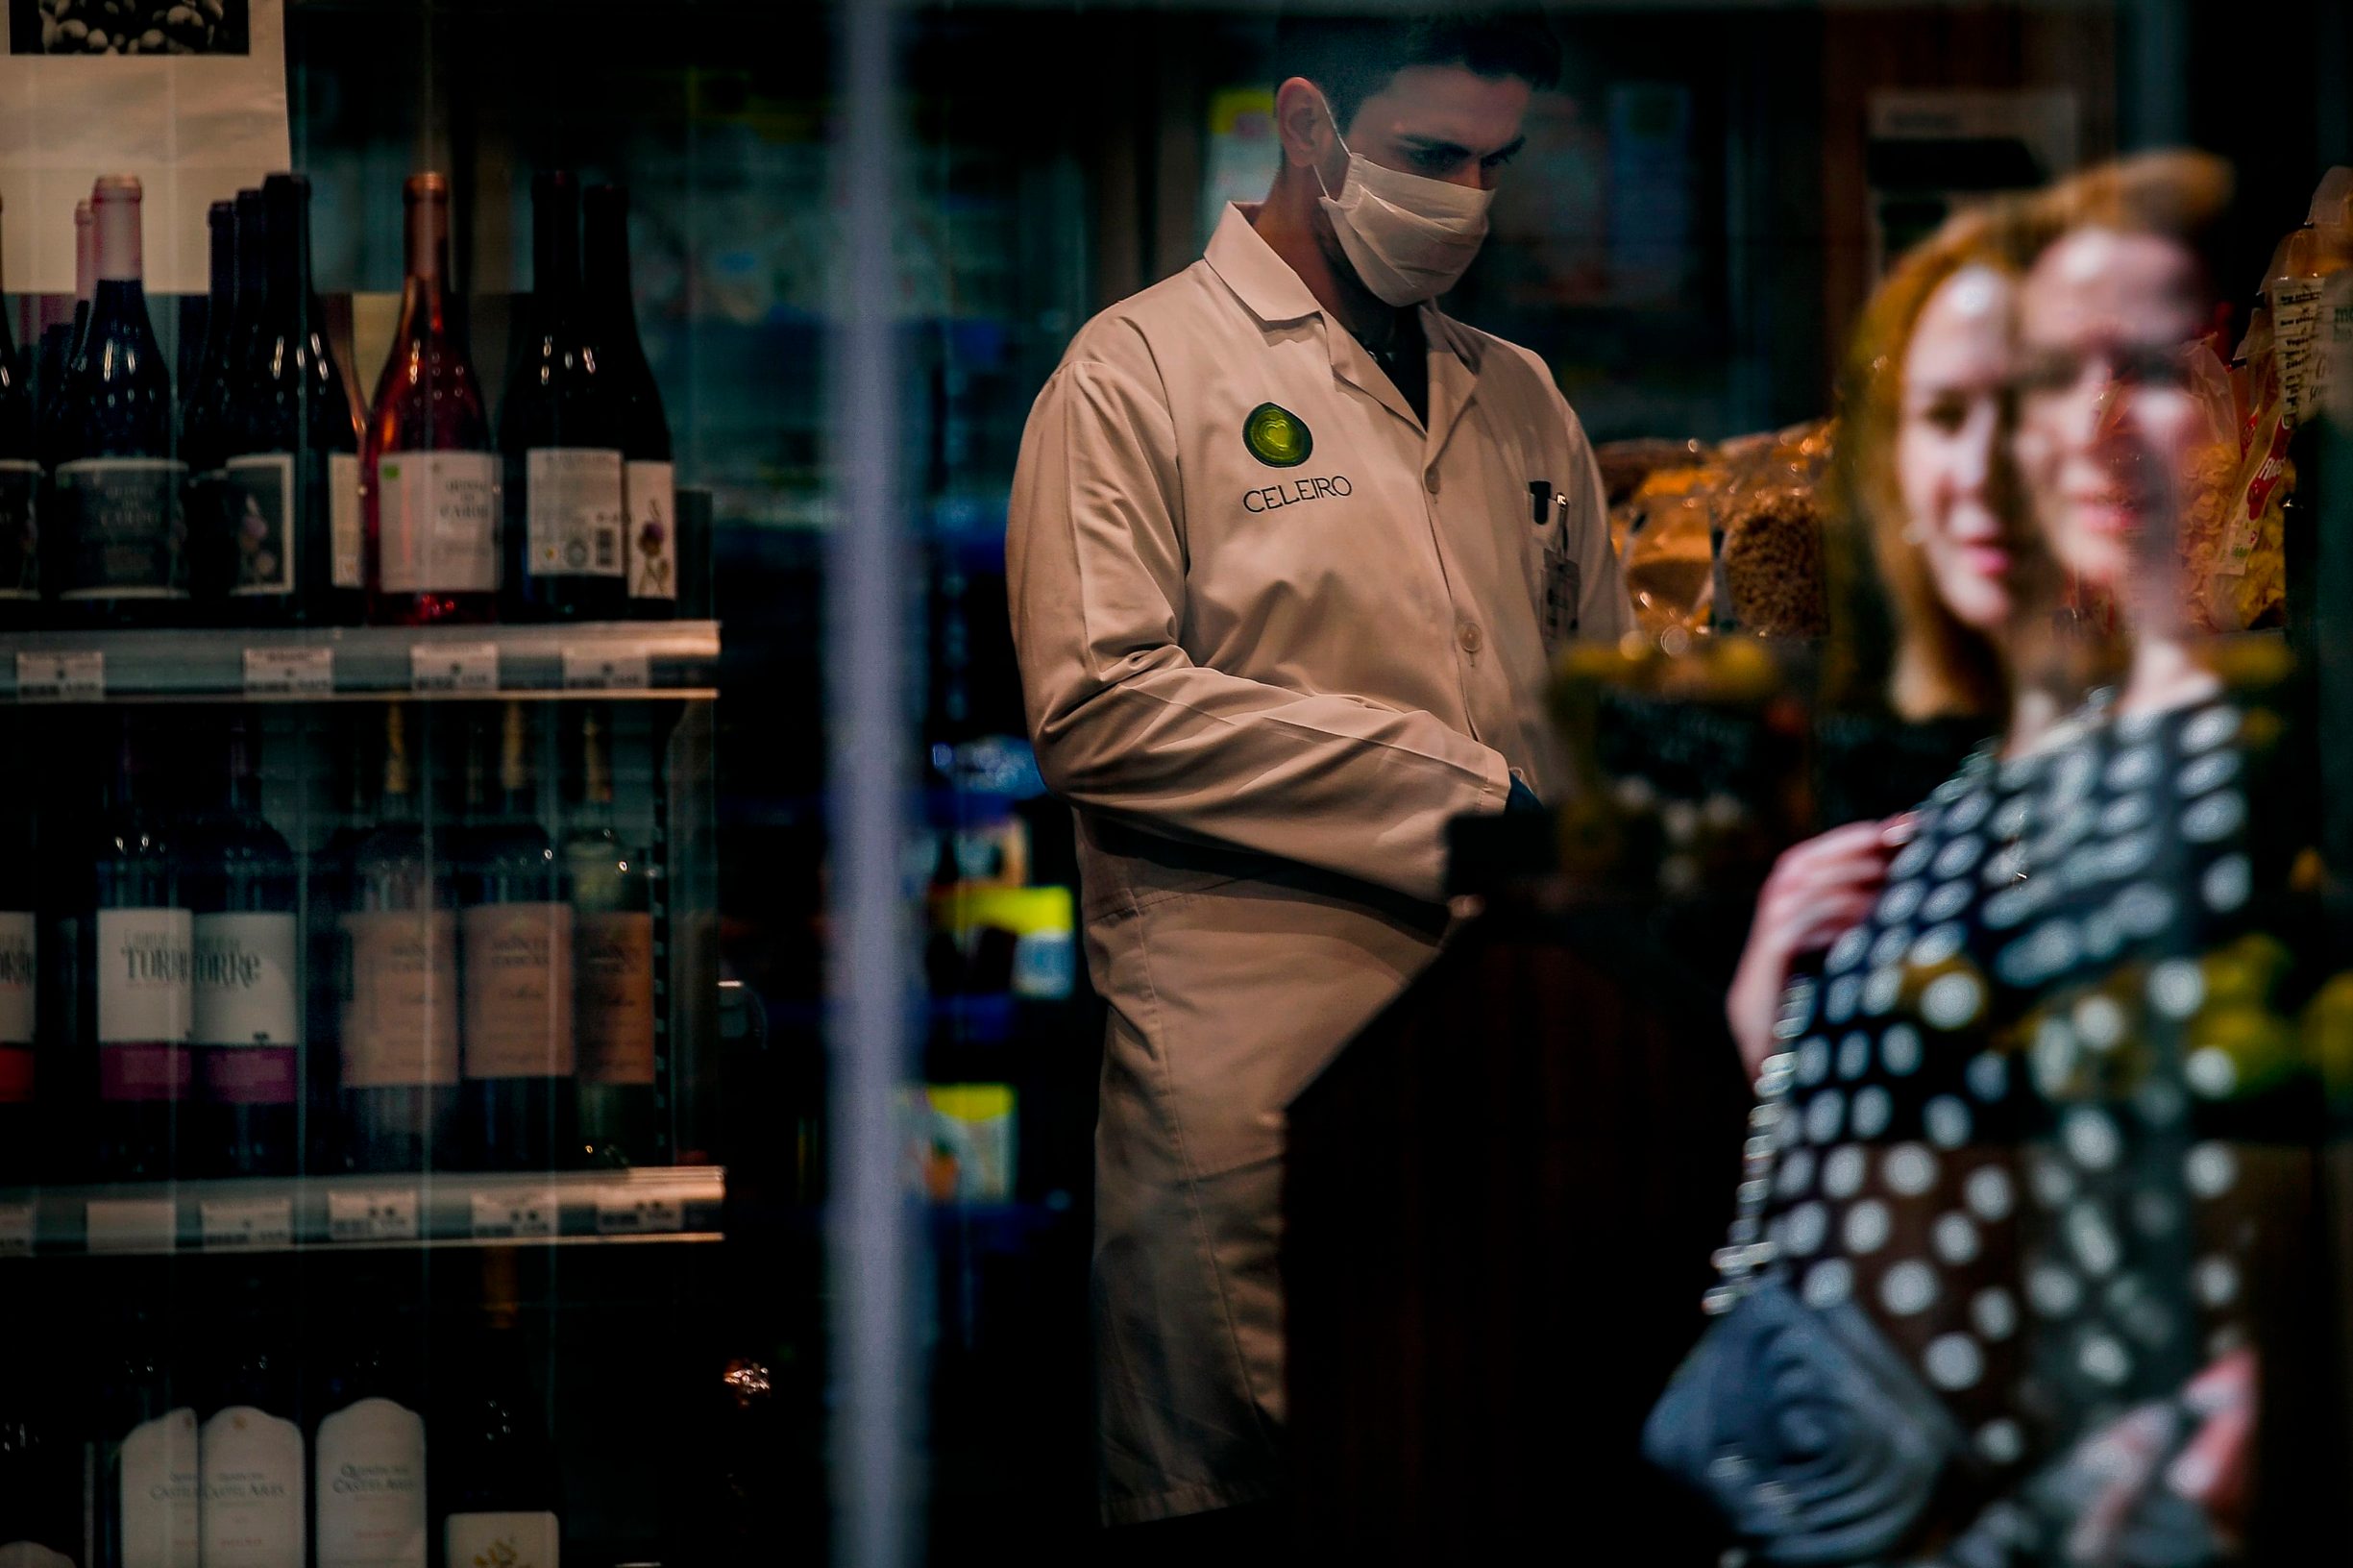 A woman walks past a supermarket where an employee wears a face mask in downtown Lisbon on March 14, 2020. - Portugal has so far reported 169 confirmed cases of coronavirus, far below neighboring Spain, where there are over 5,700 cases and dozens of fatalities. The governmnet has ordered schools to close next week due to the outbreak of the deadly virus, ordered nightclubs to close and imposed restrictions on the number of people who can visit restuarants. It has also announced that cruise ships would not be allowed to disembark passengers except those living in Portugal. (Photo by PATRICIA DE MELO MOREIRA / AFP)